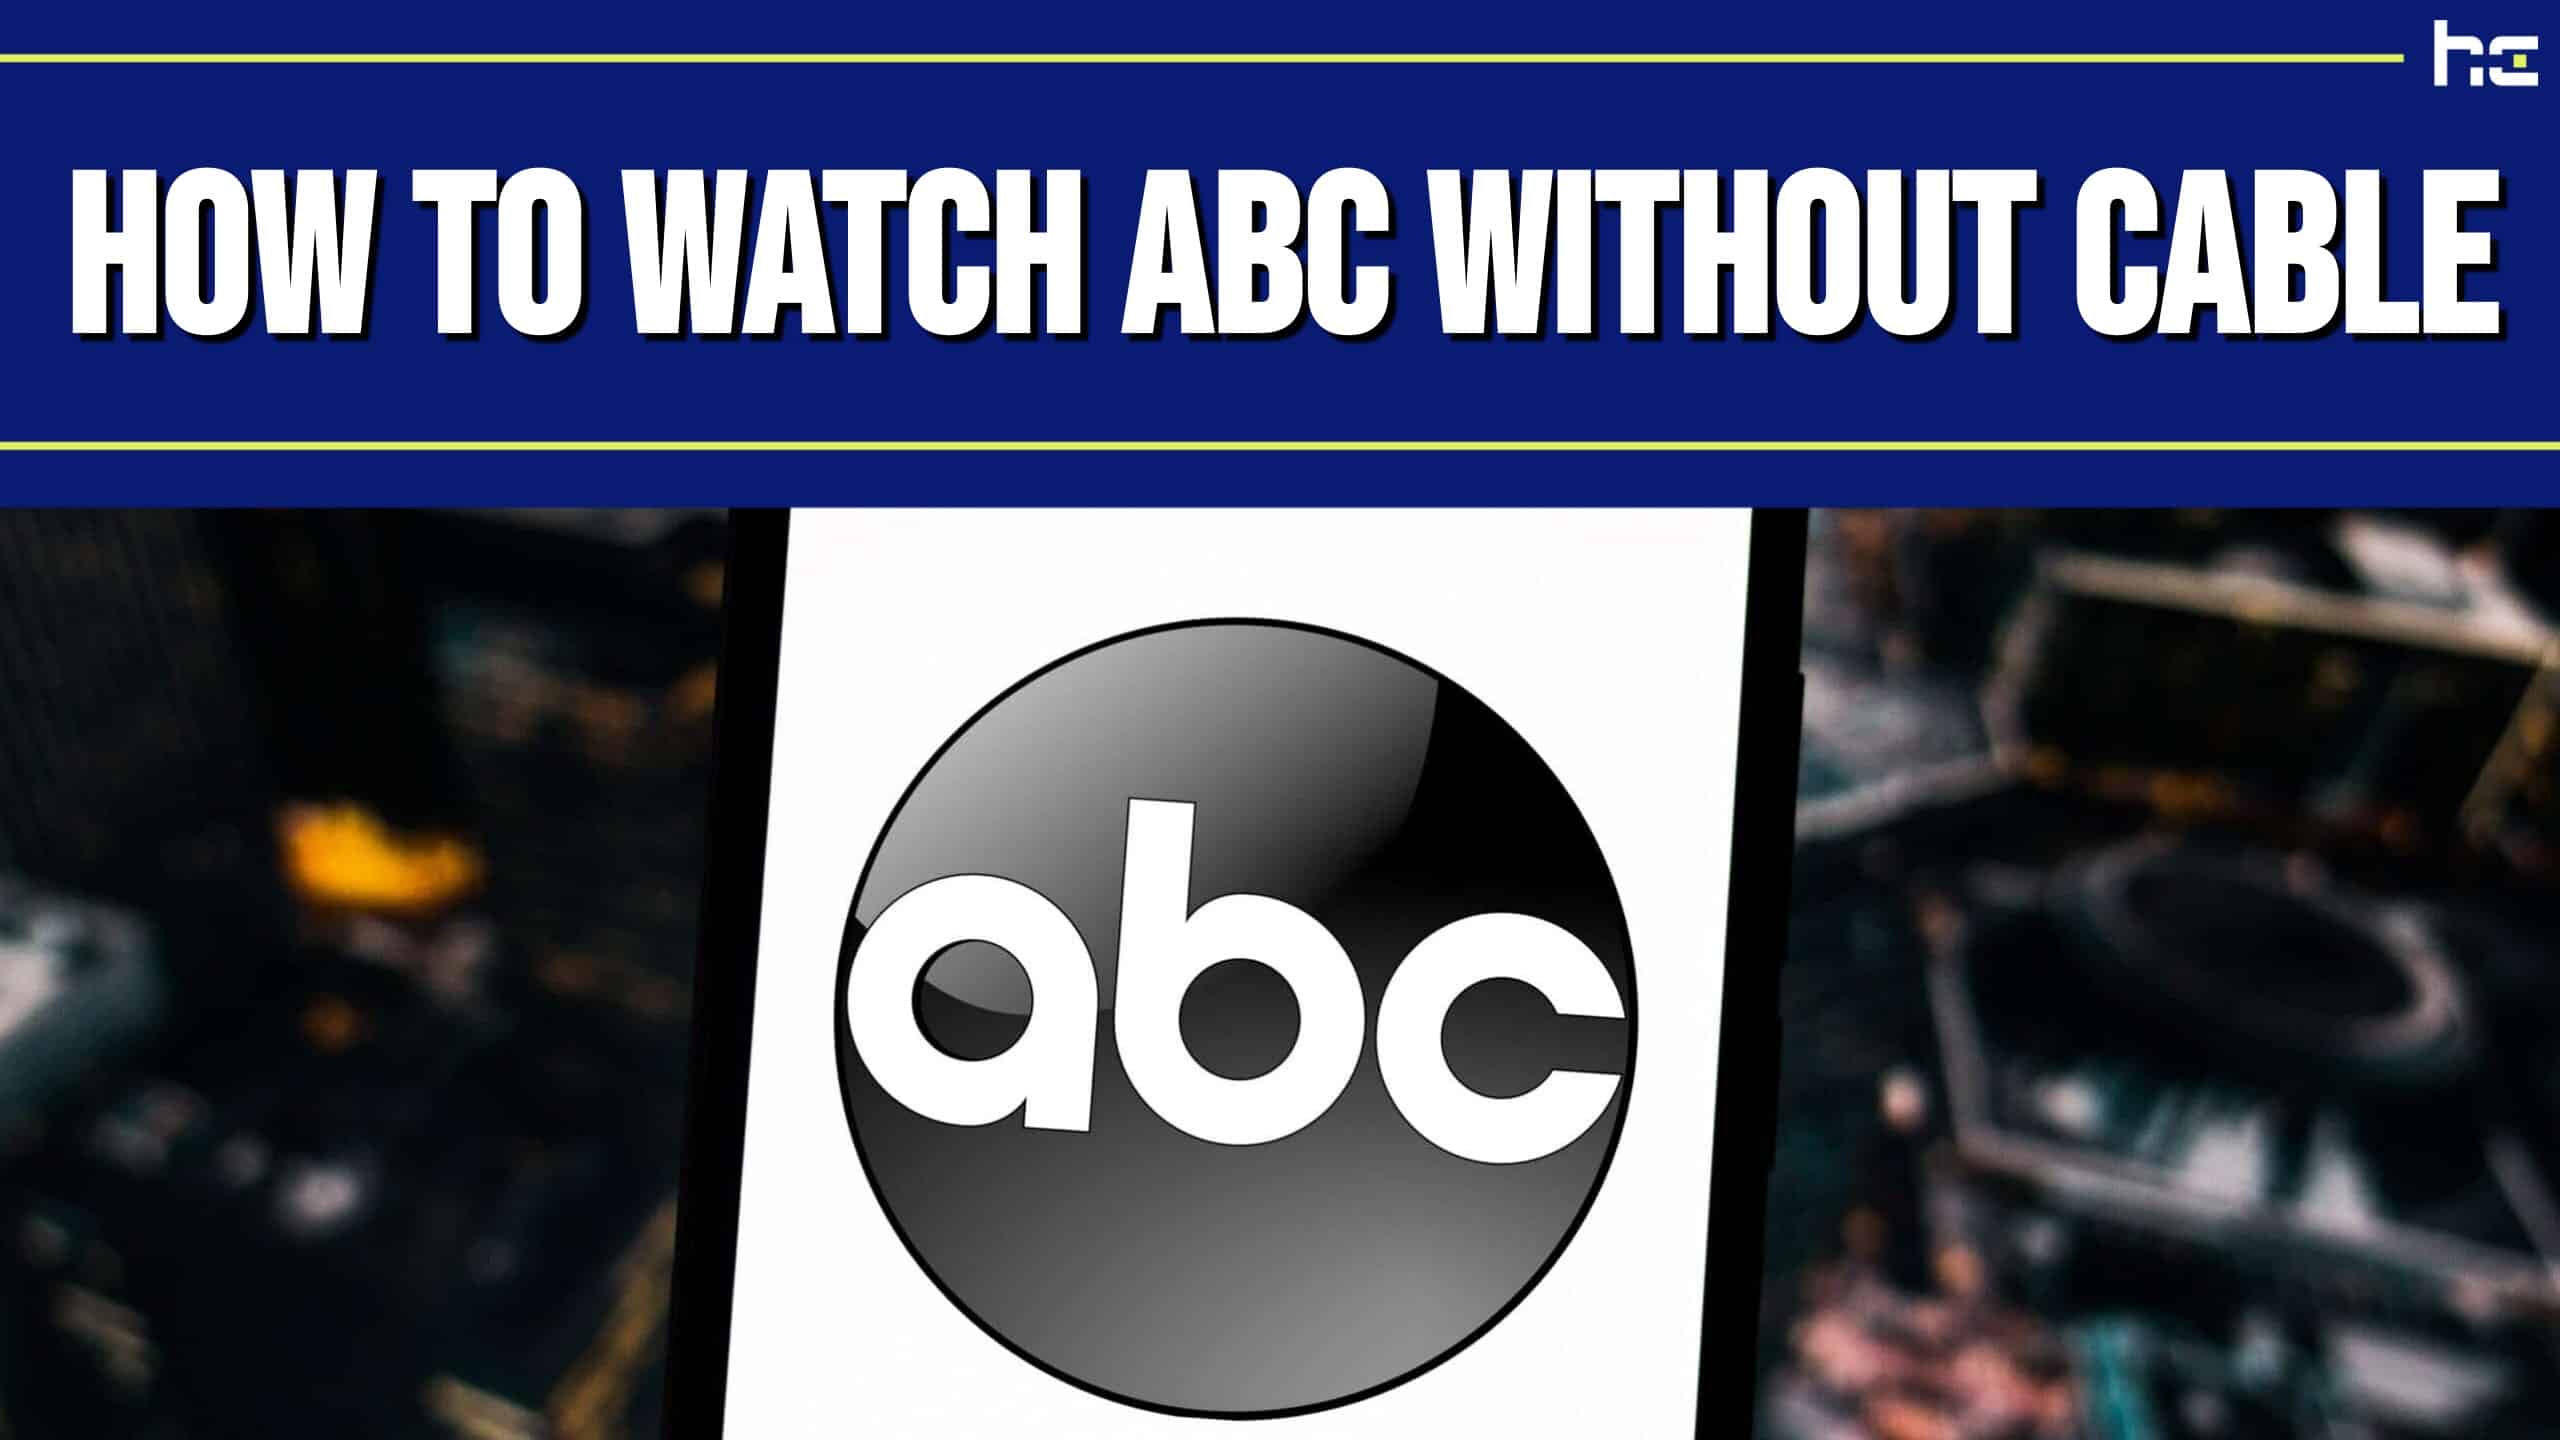 Watch ABC without cable